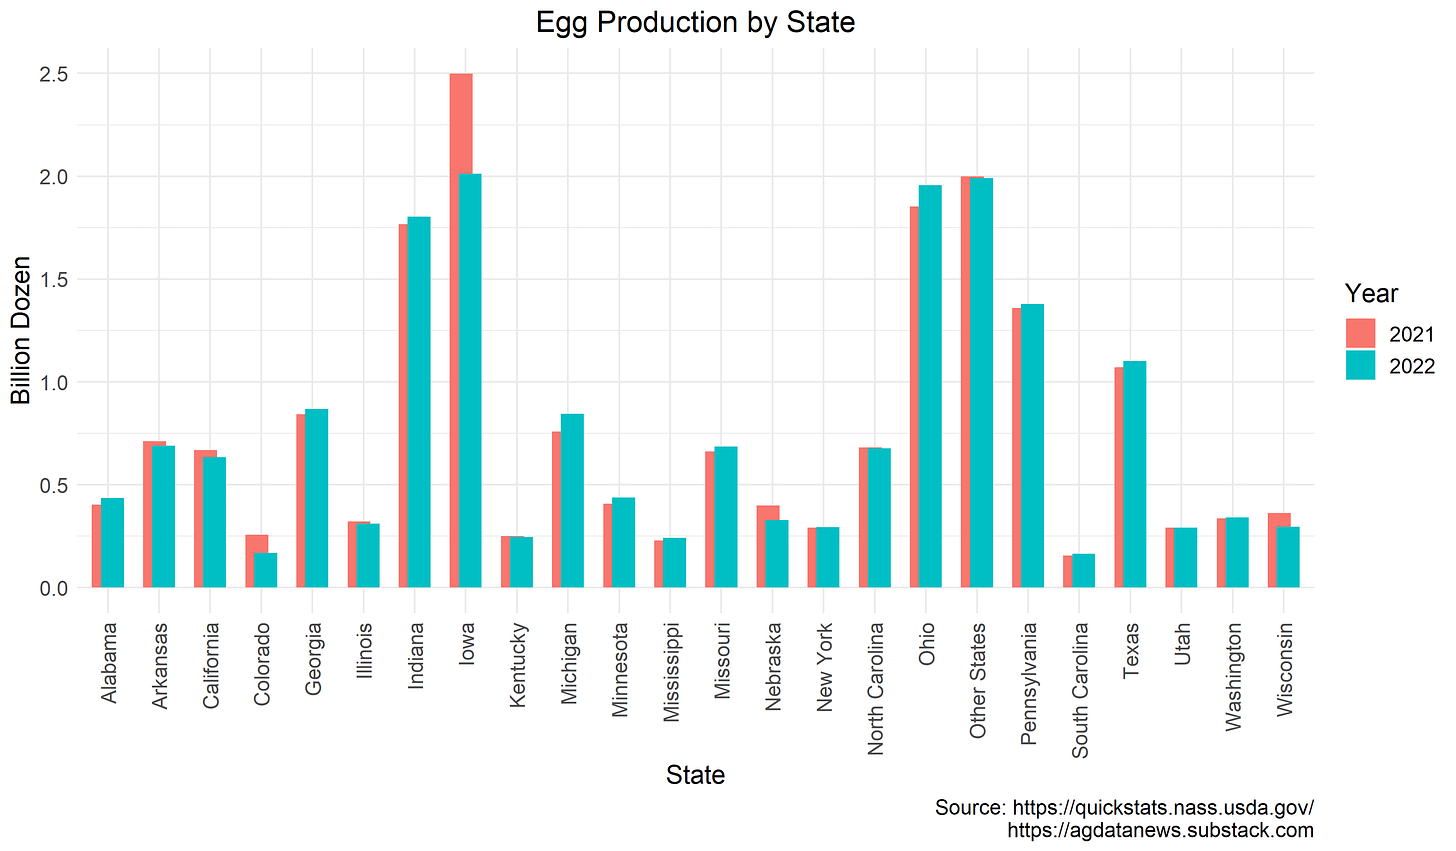 Egg production by state